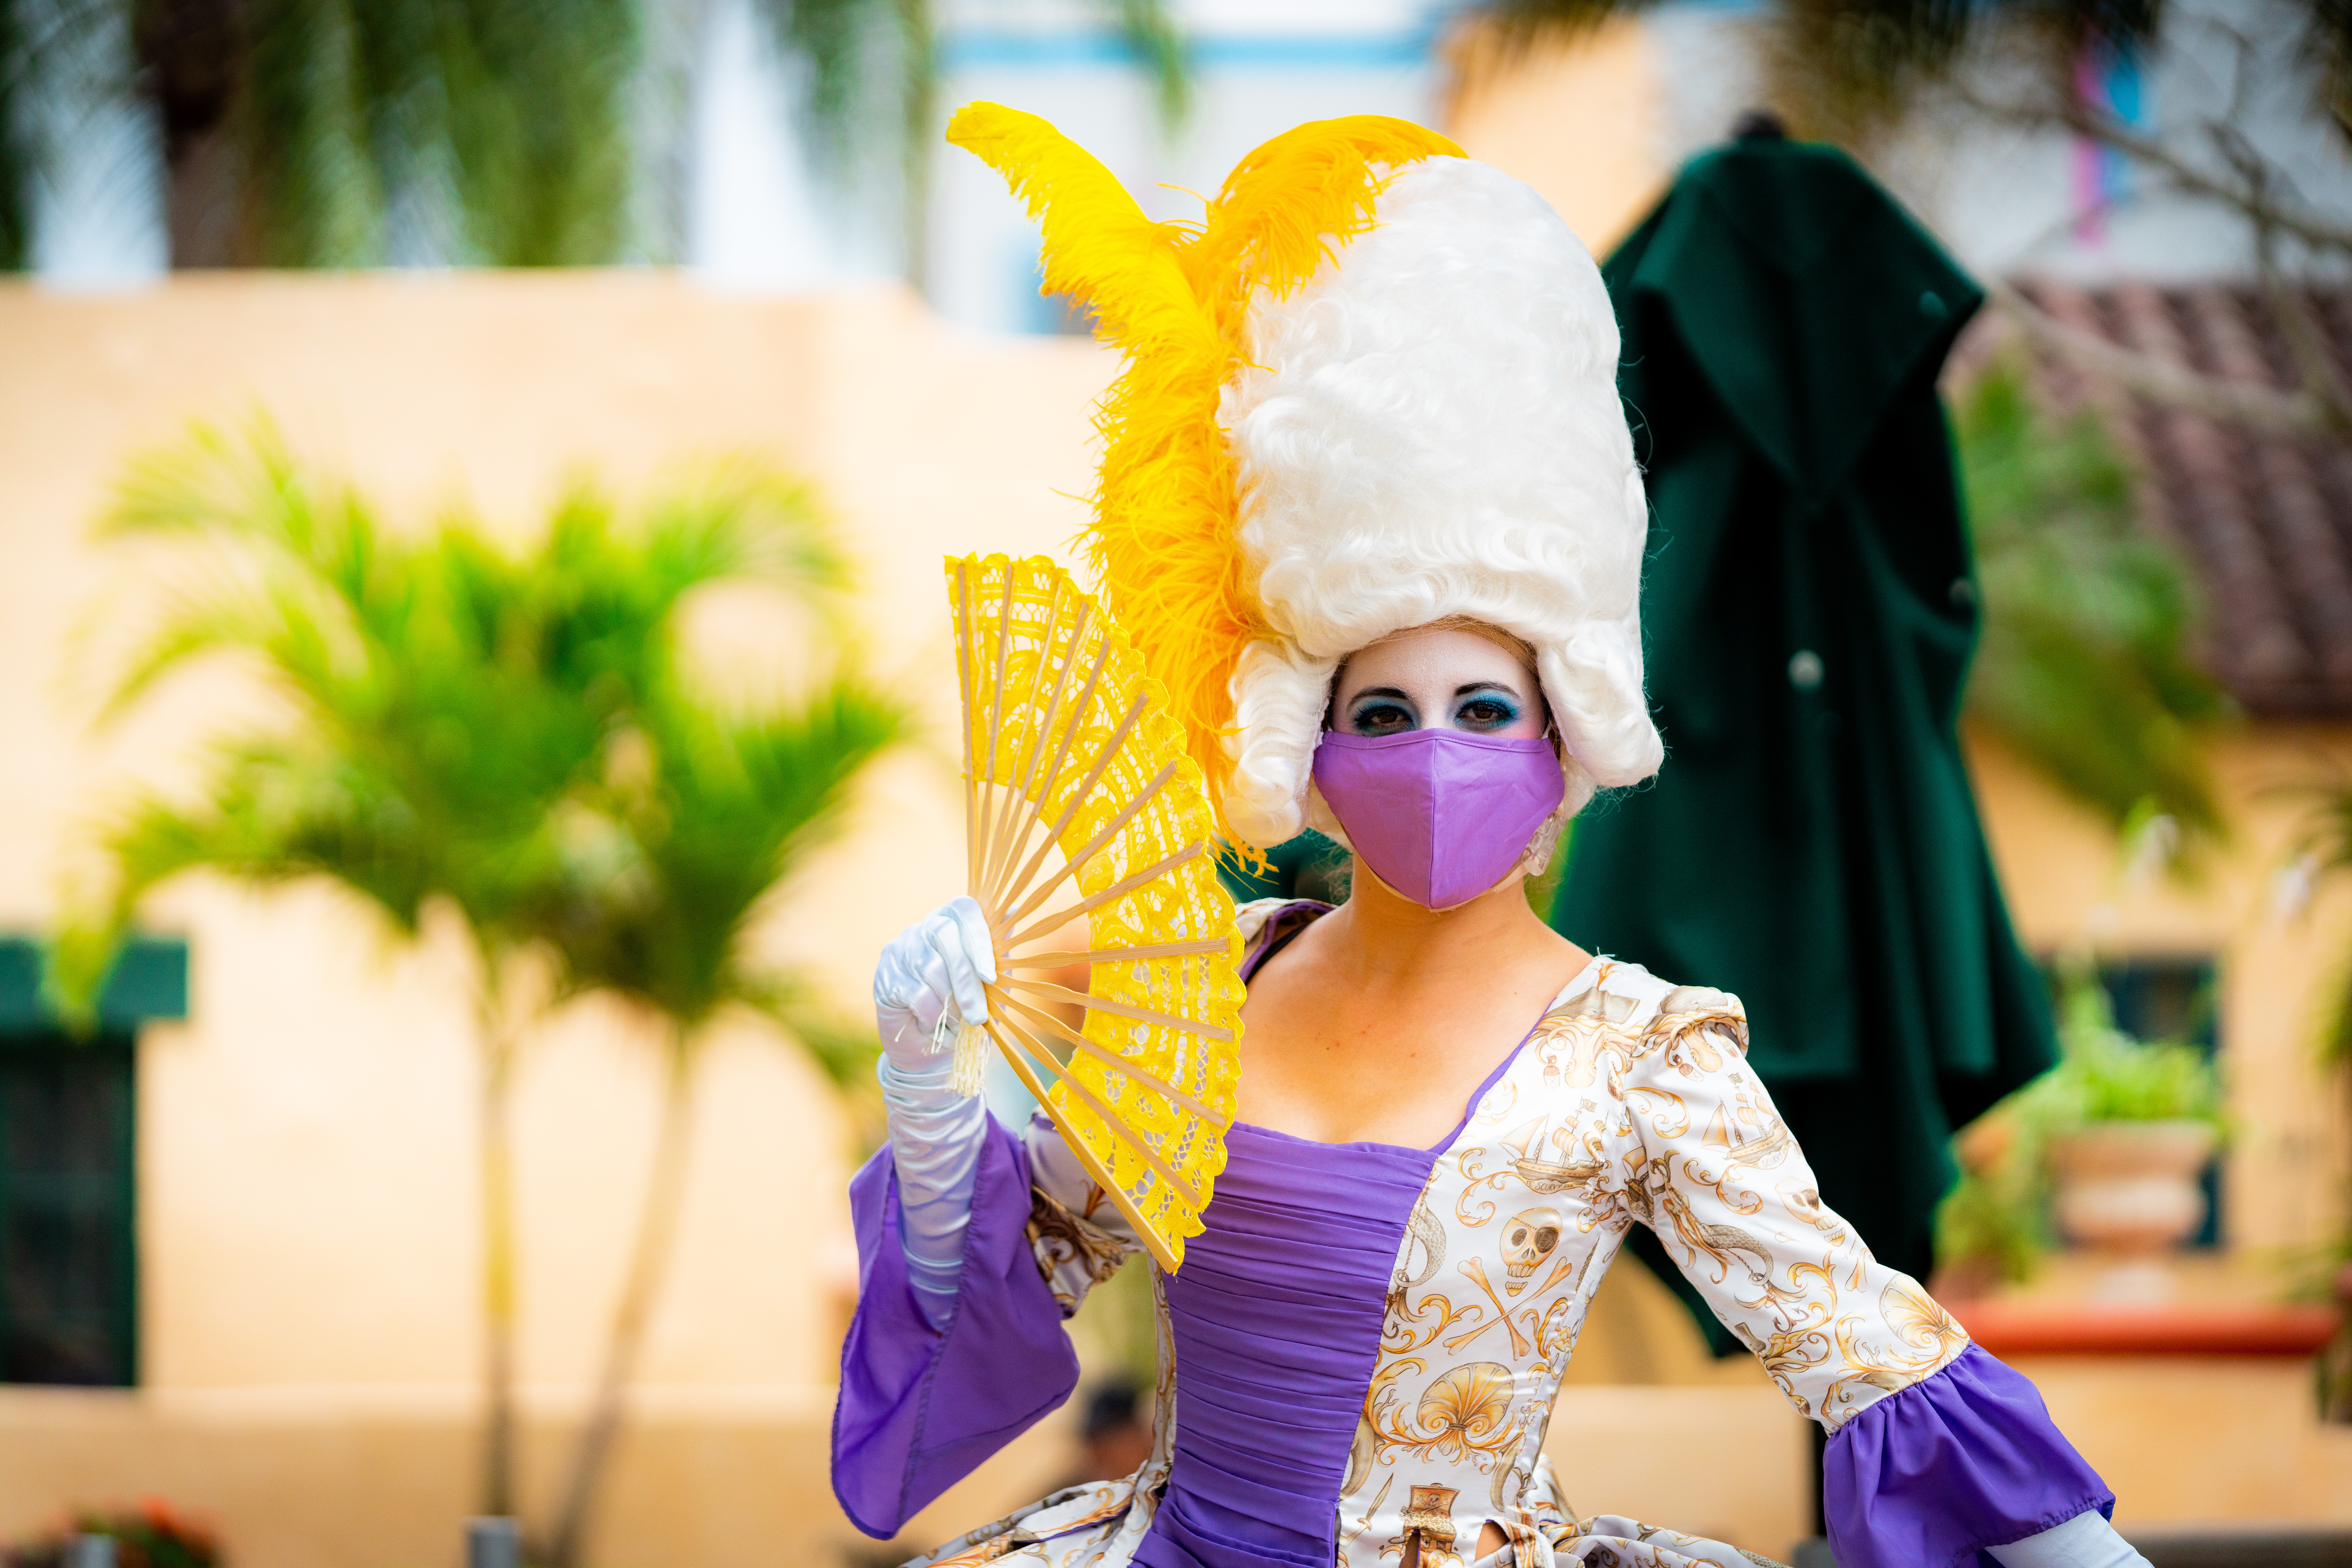 The wild and colorful performers at Mardi Gras 2021